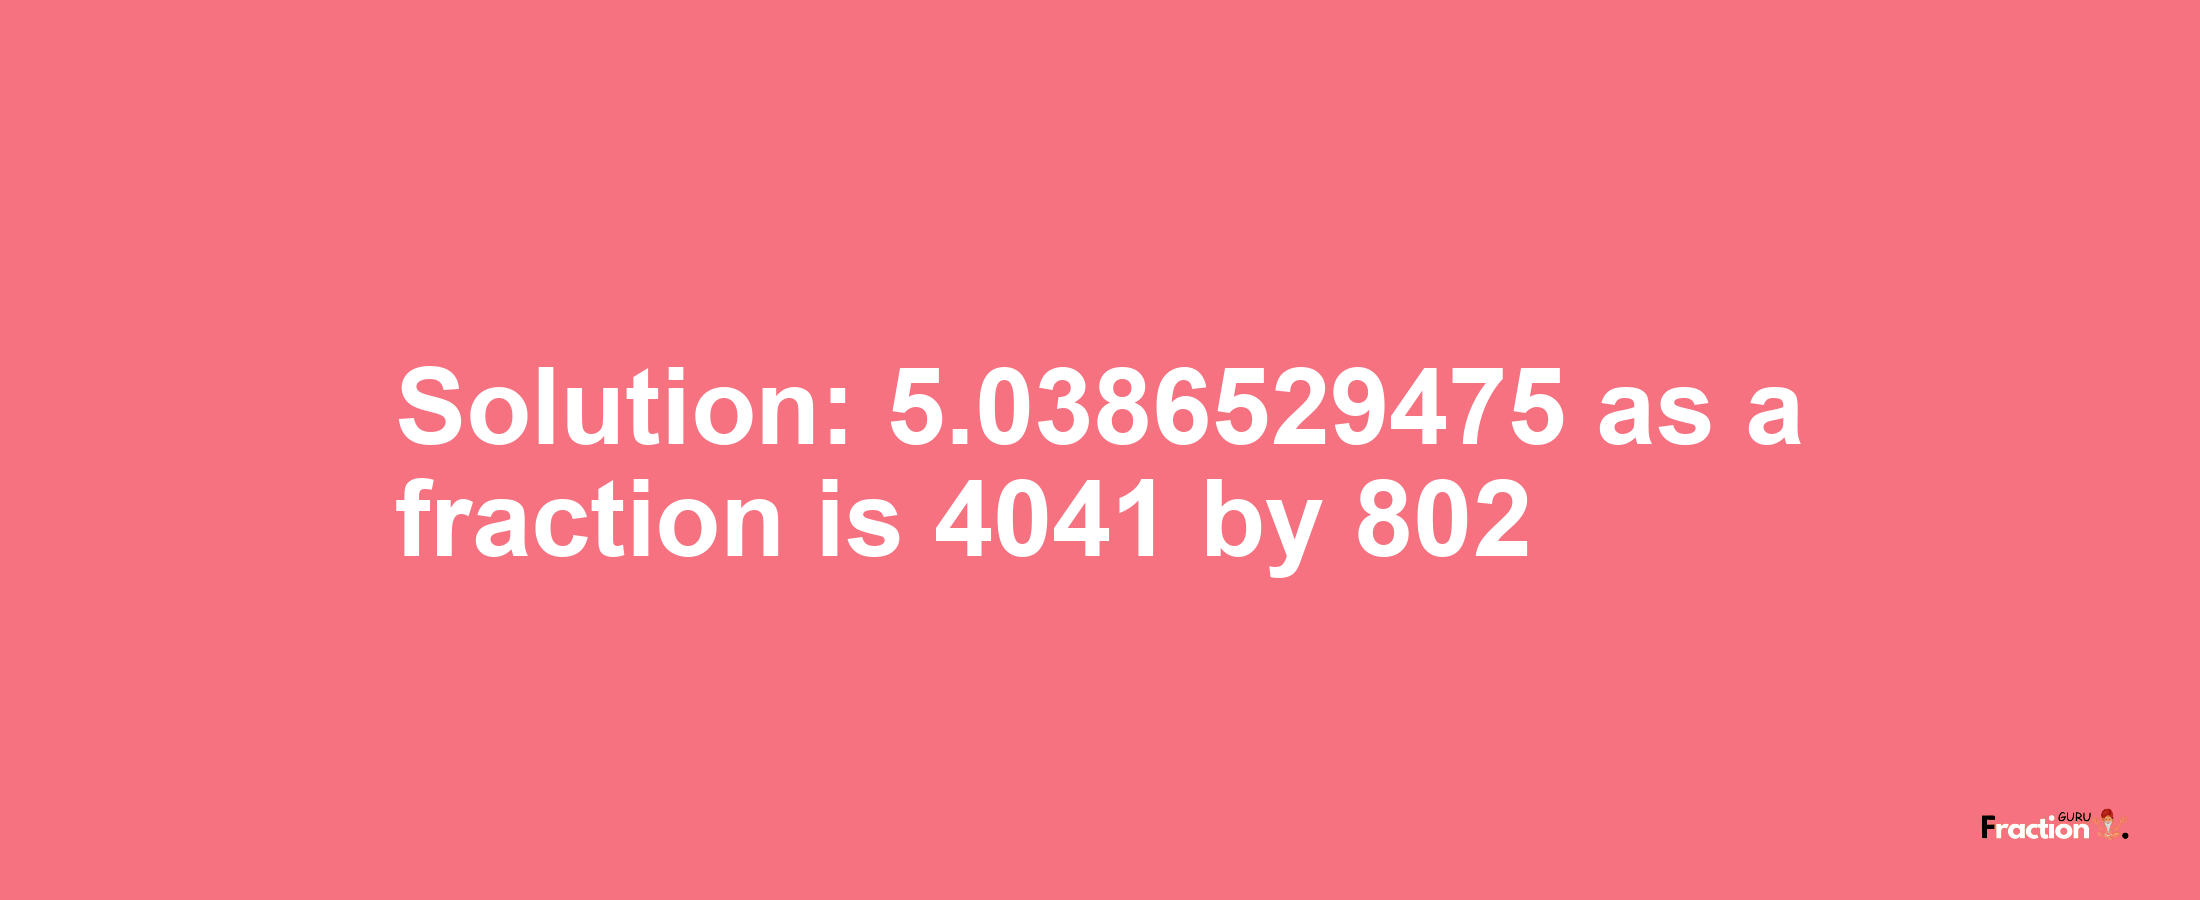 Solution:5.0386529475 as a fraction is 4041/802